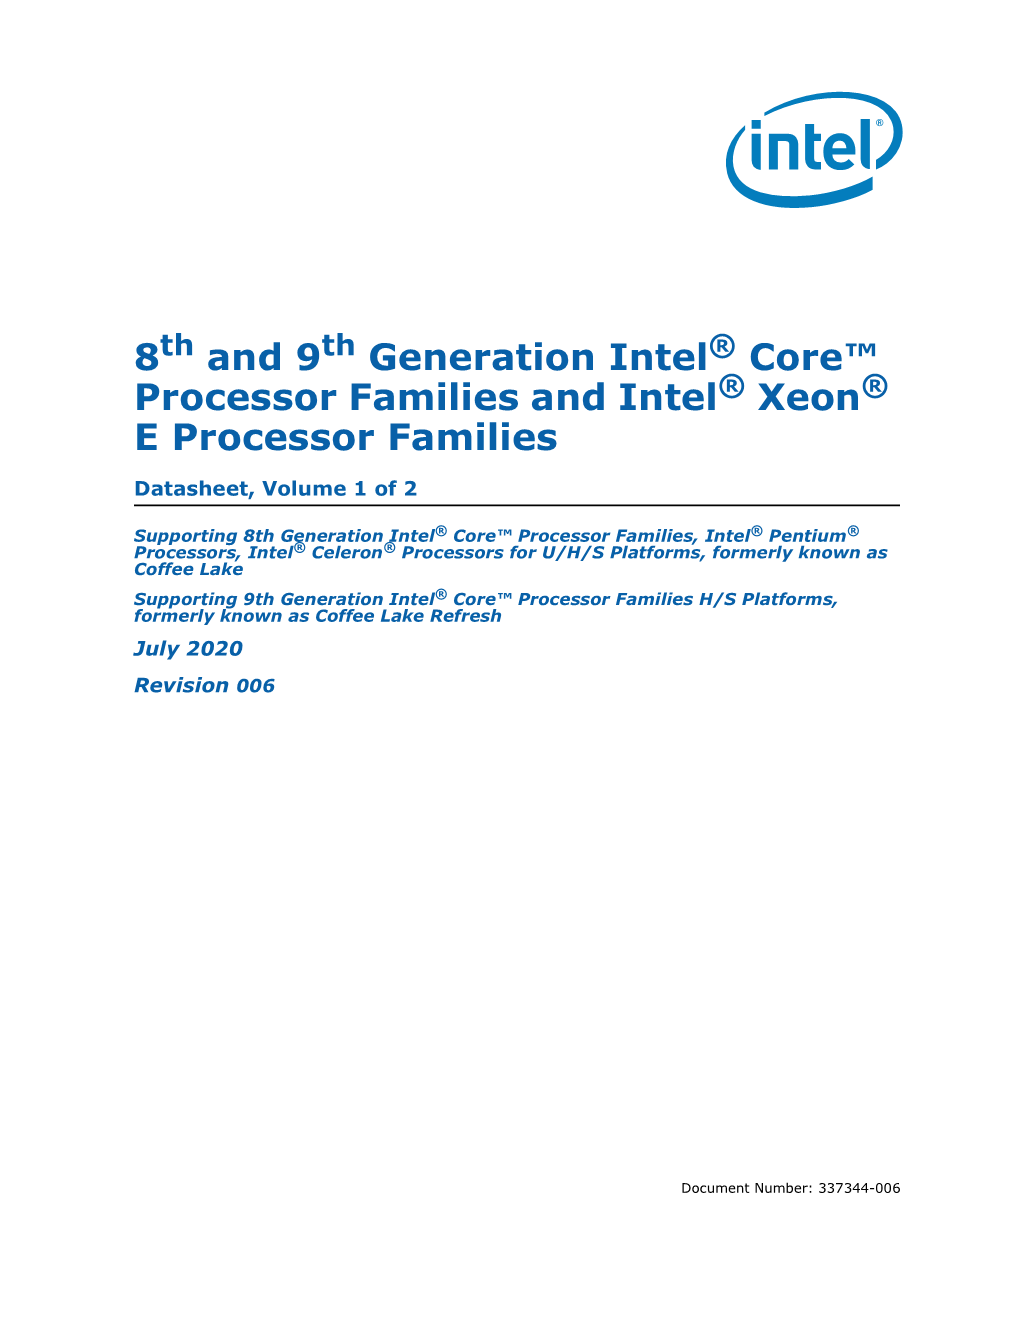 8Th and 9Th Generation Intel® Core™ Processor Families Datasheet